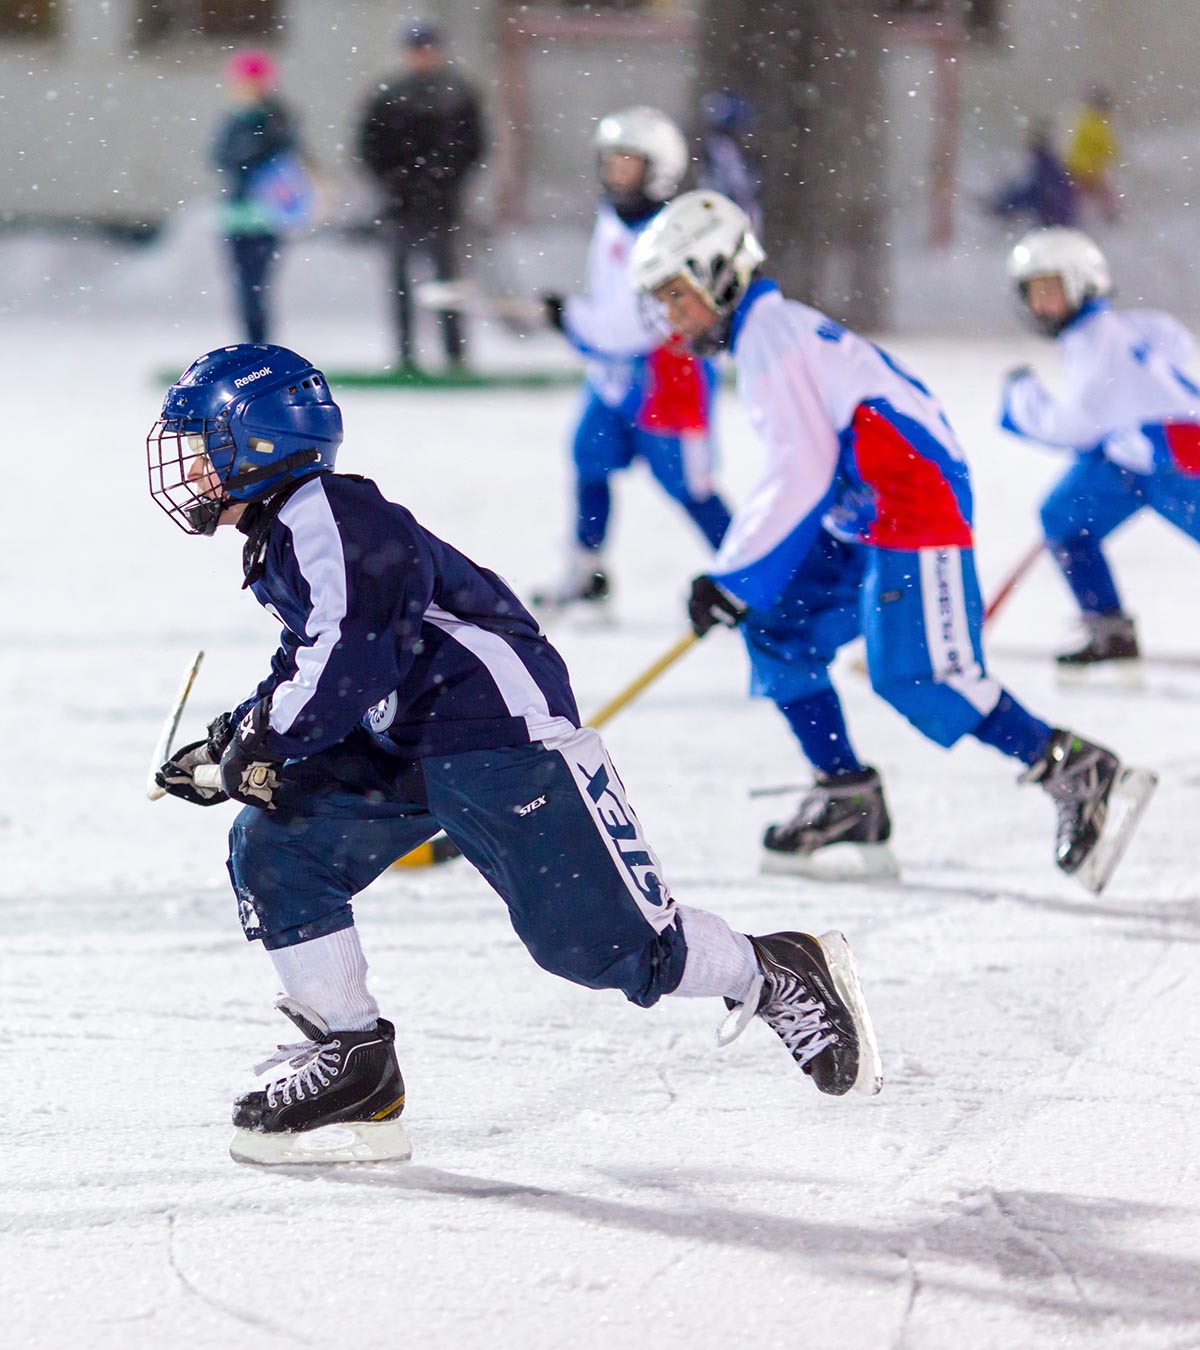 Top 10+ Hockey Facts, Rules, And Safety Tips For Kids